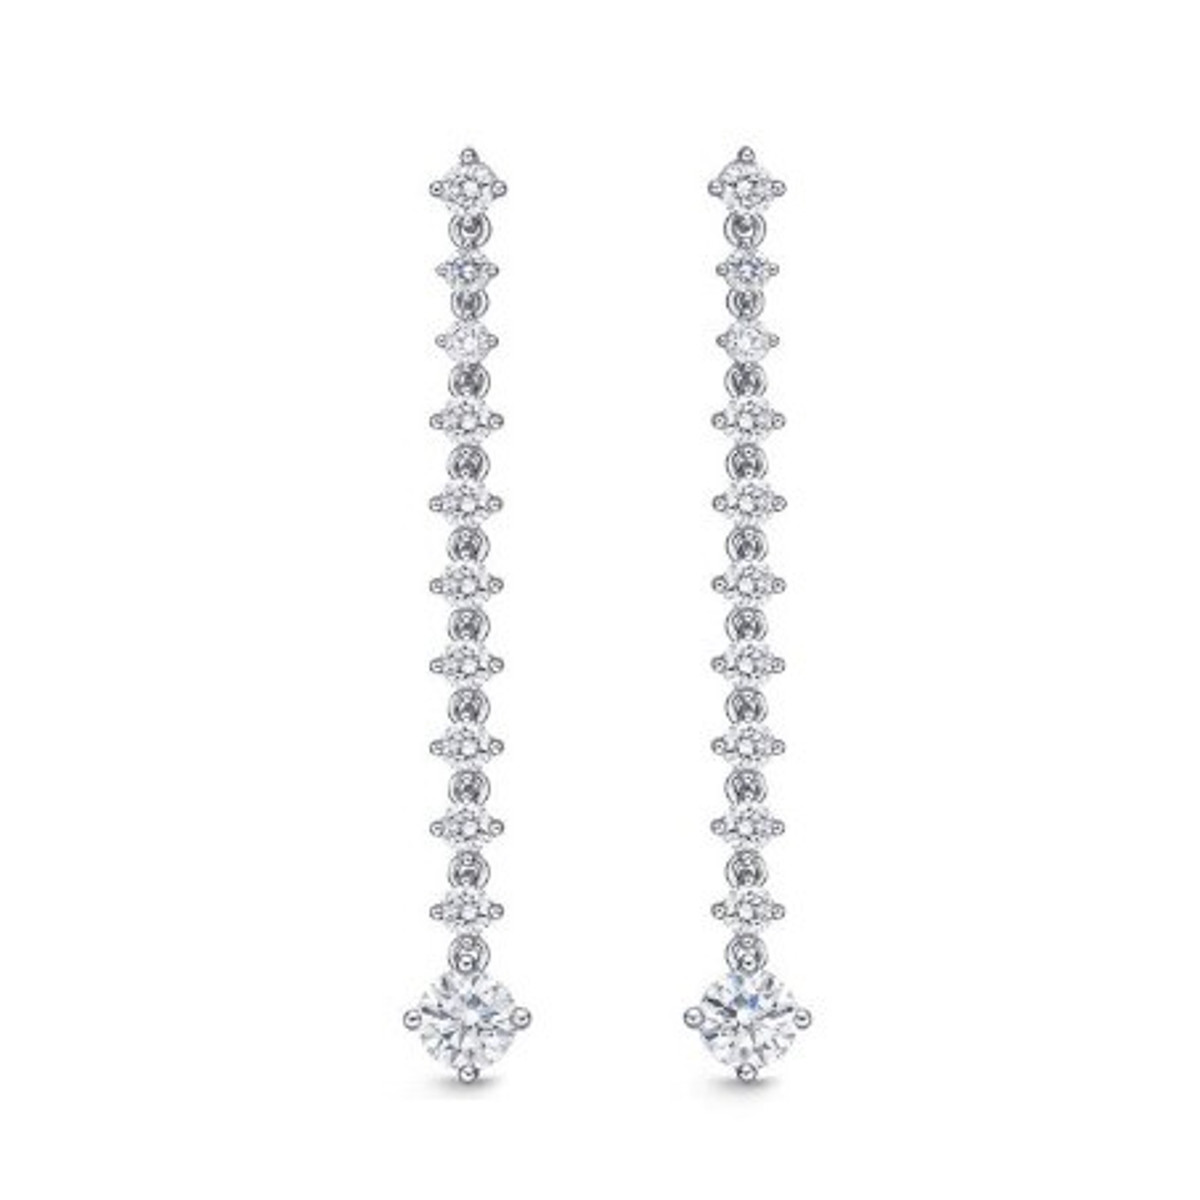 Hyde Park Collection 18K White Gold Diamond Drop Earrings-47884 Product Image